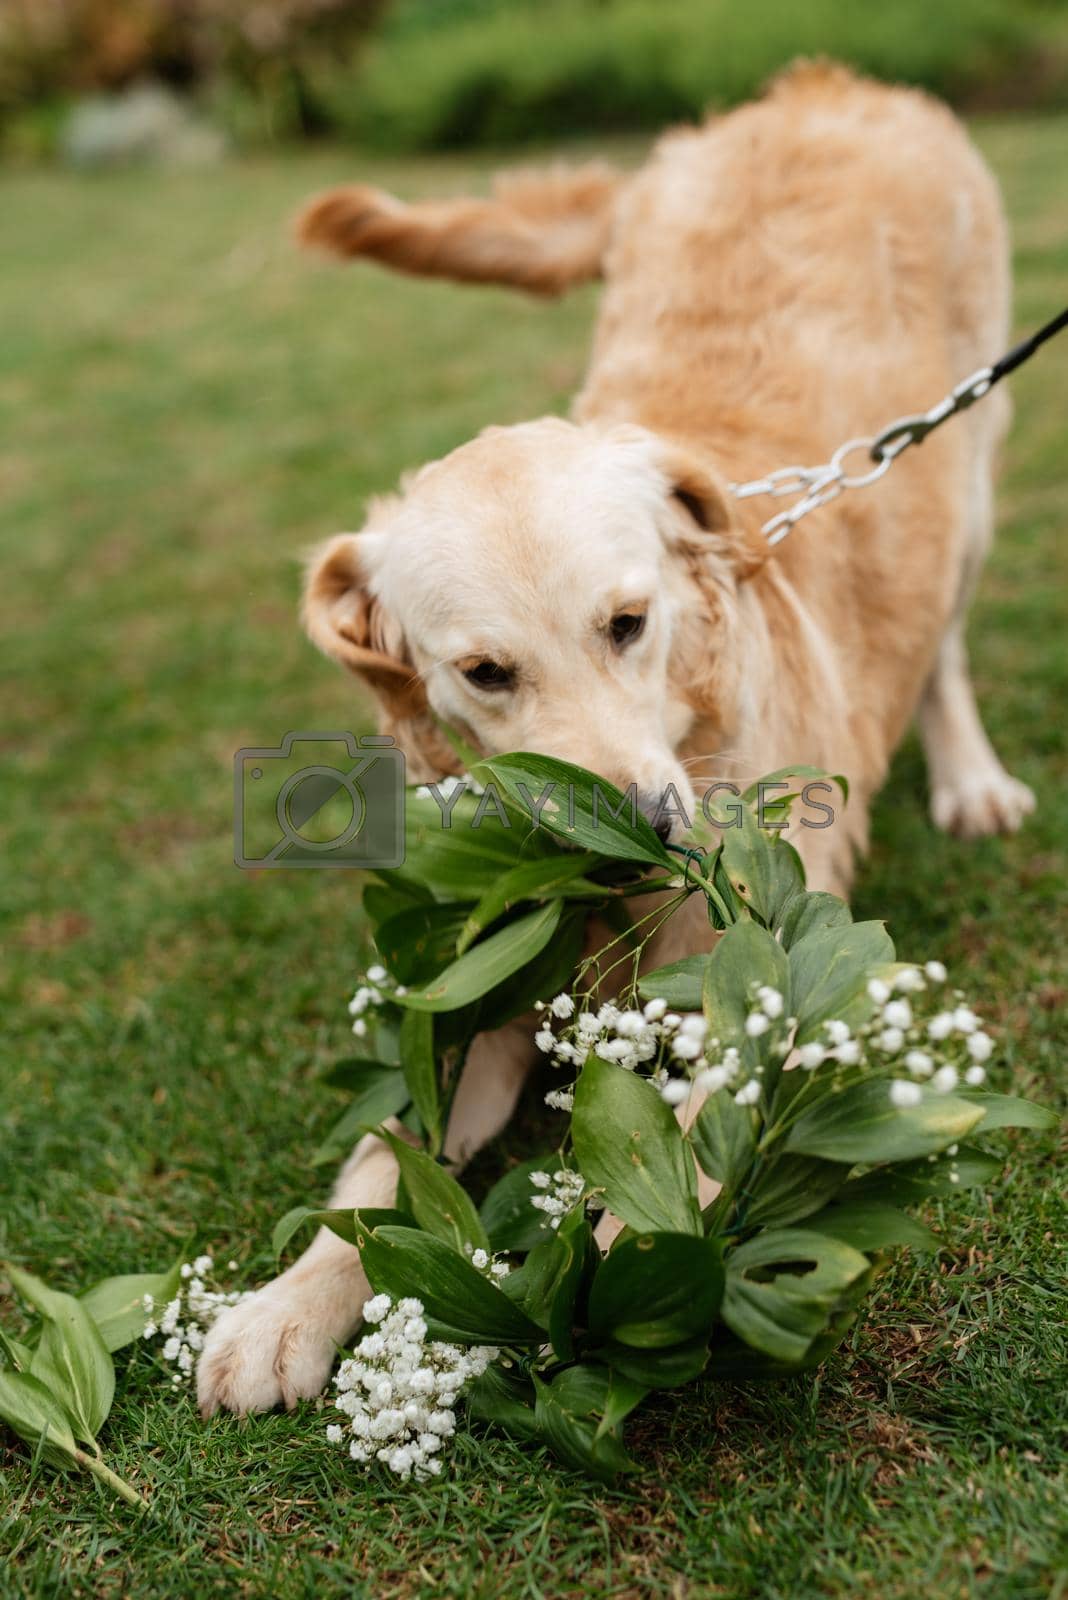 Royalty free image of golden retriever dog at a wedding by Andreua